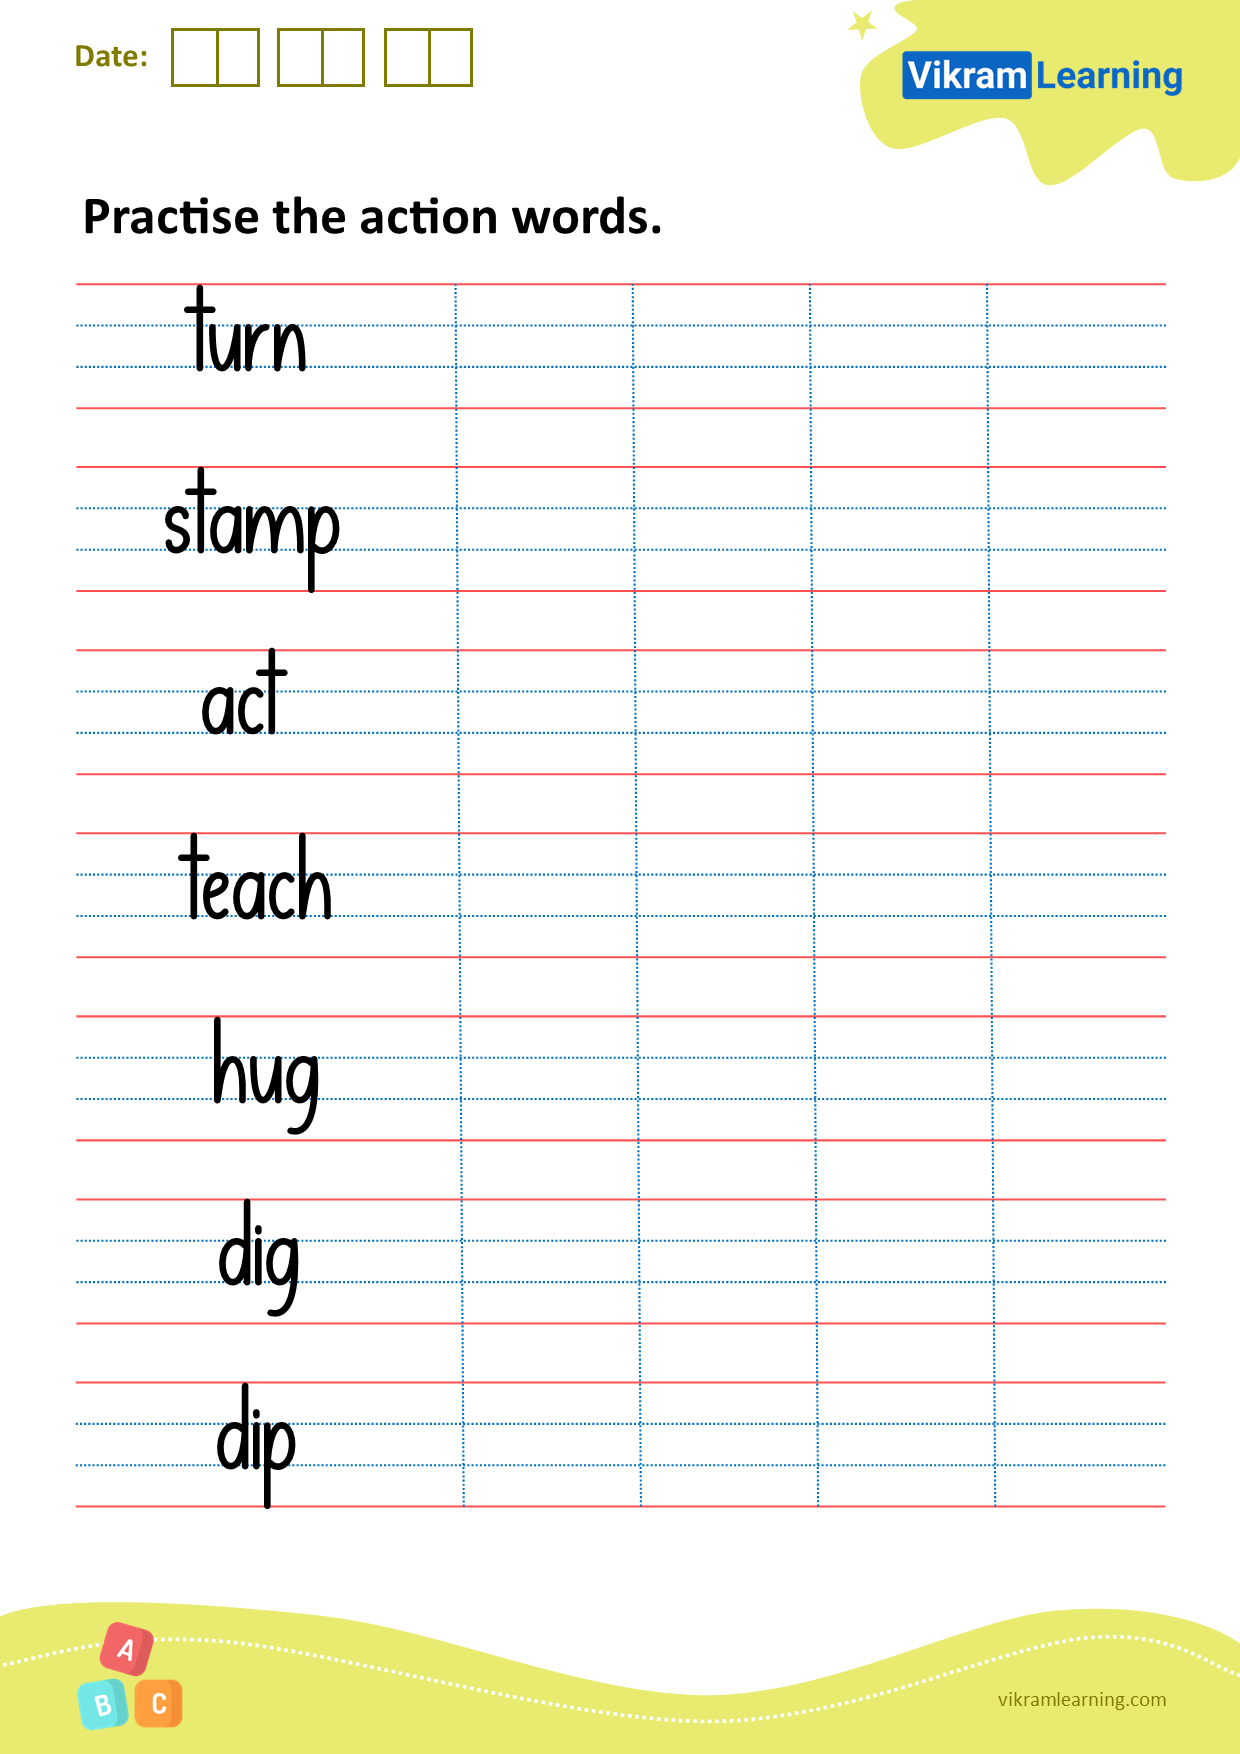 download-practice-the-action-words-worksheets-vikramlearning